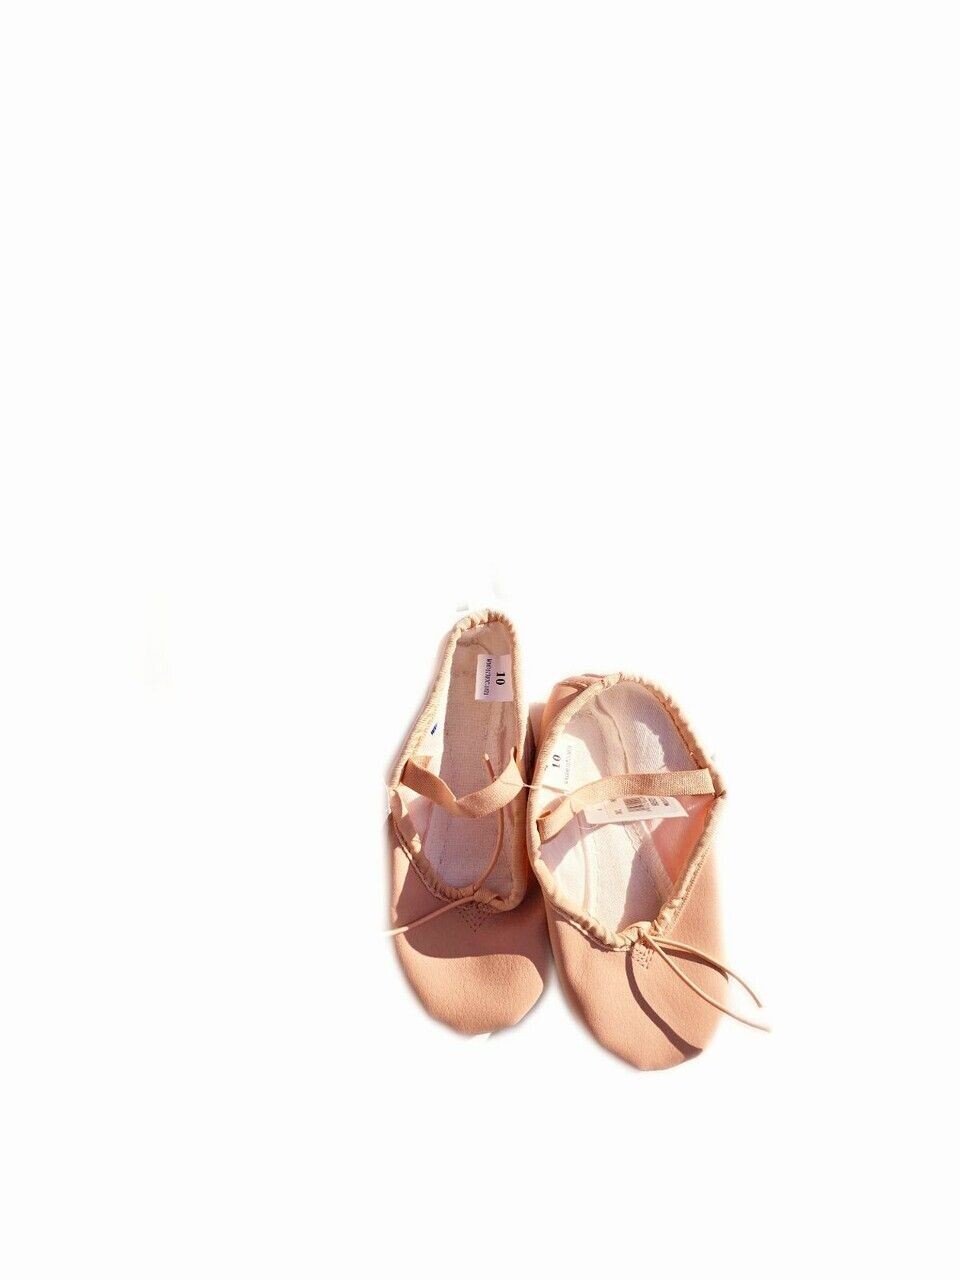 ​NEW With Tags Ballerina Pink Dance Shoes.